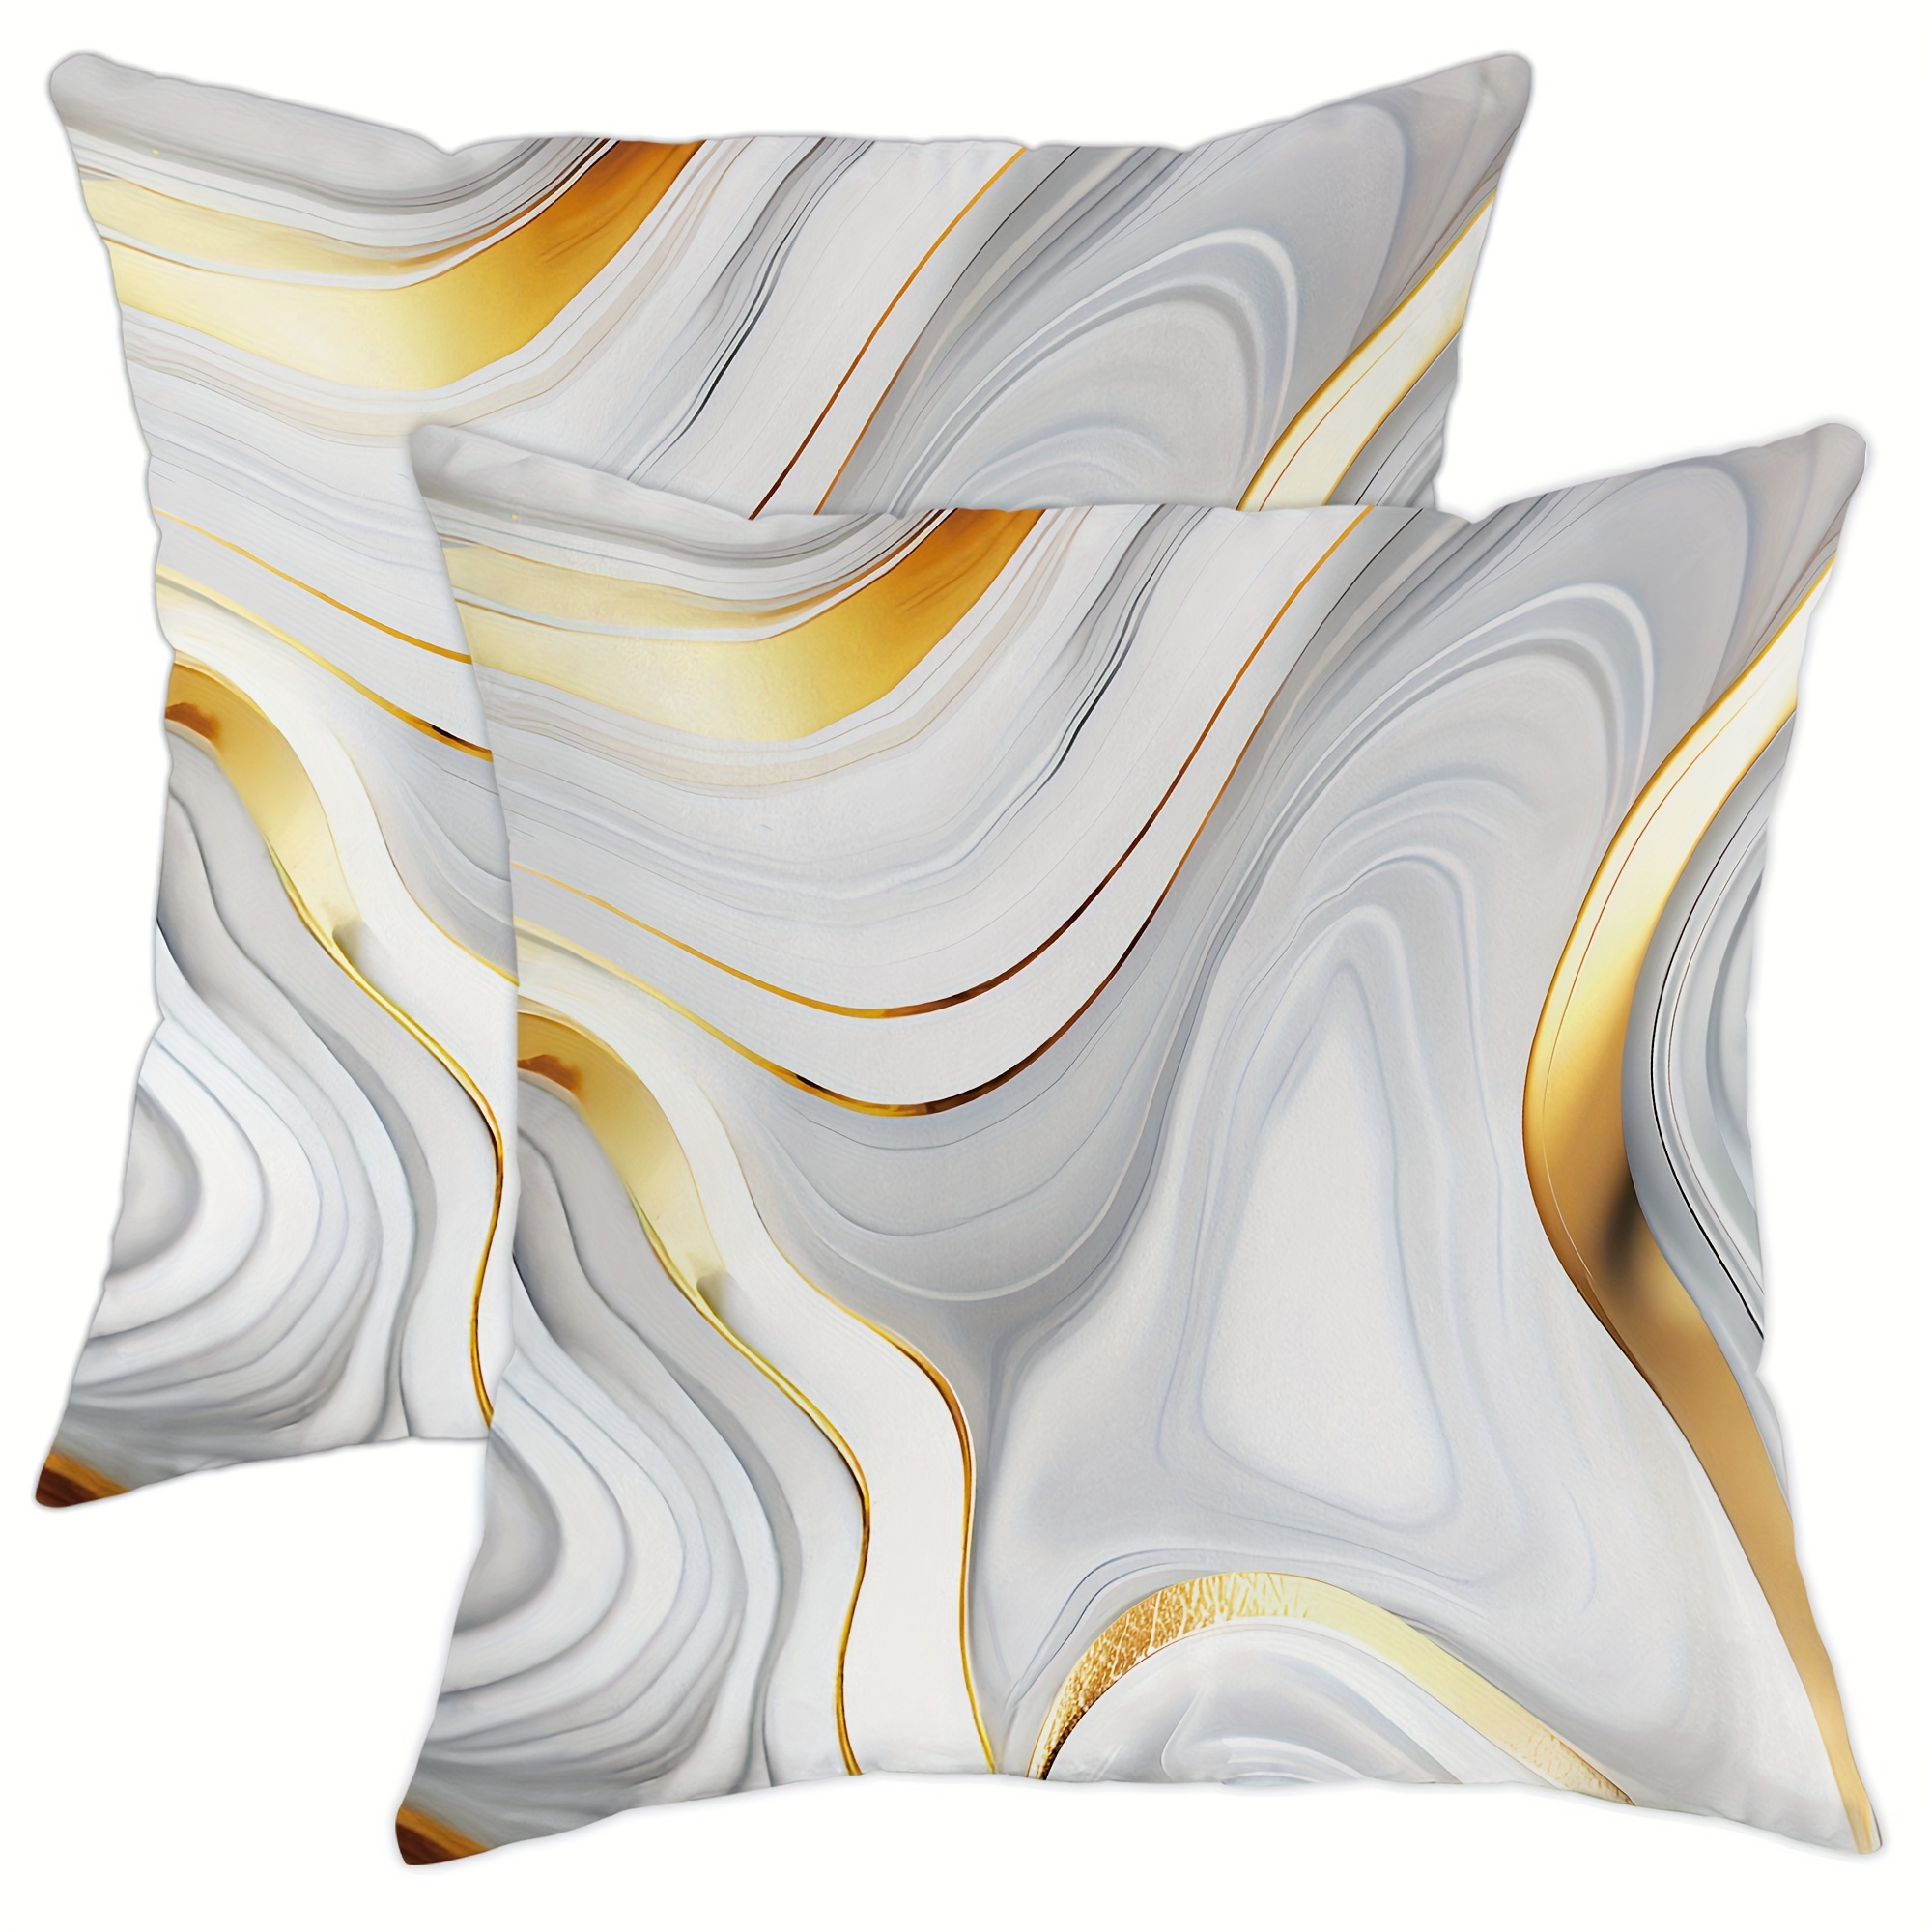 

2pcs, Velvet Throw Pillow Covers, Modern Minimalist Abstract Marbled Gray Gold Throw Pillow Covers 18*18inch, For Living Room Bedroom Sofa Bed Decoration